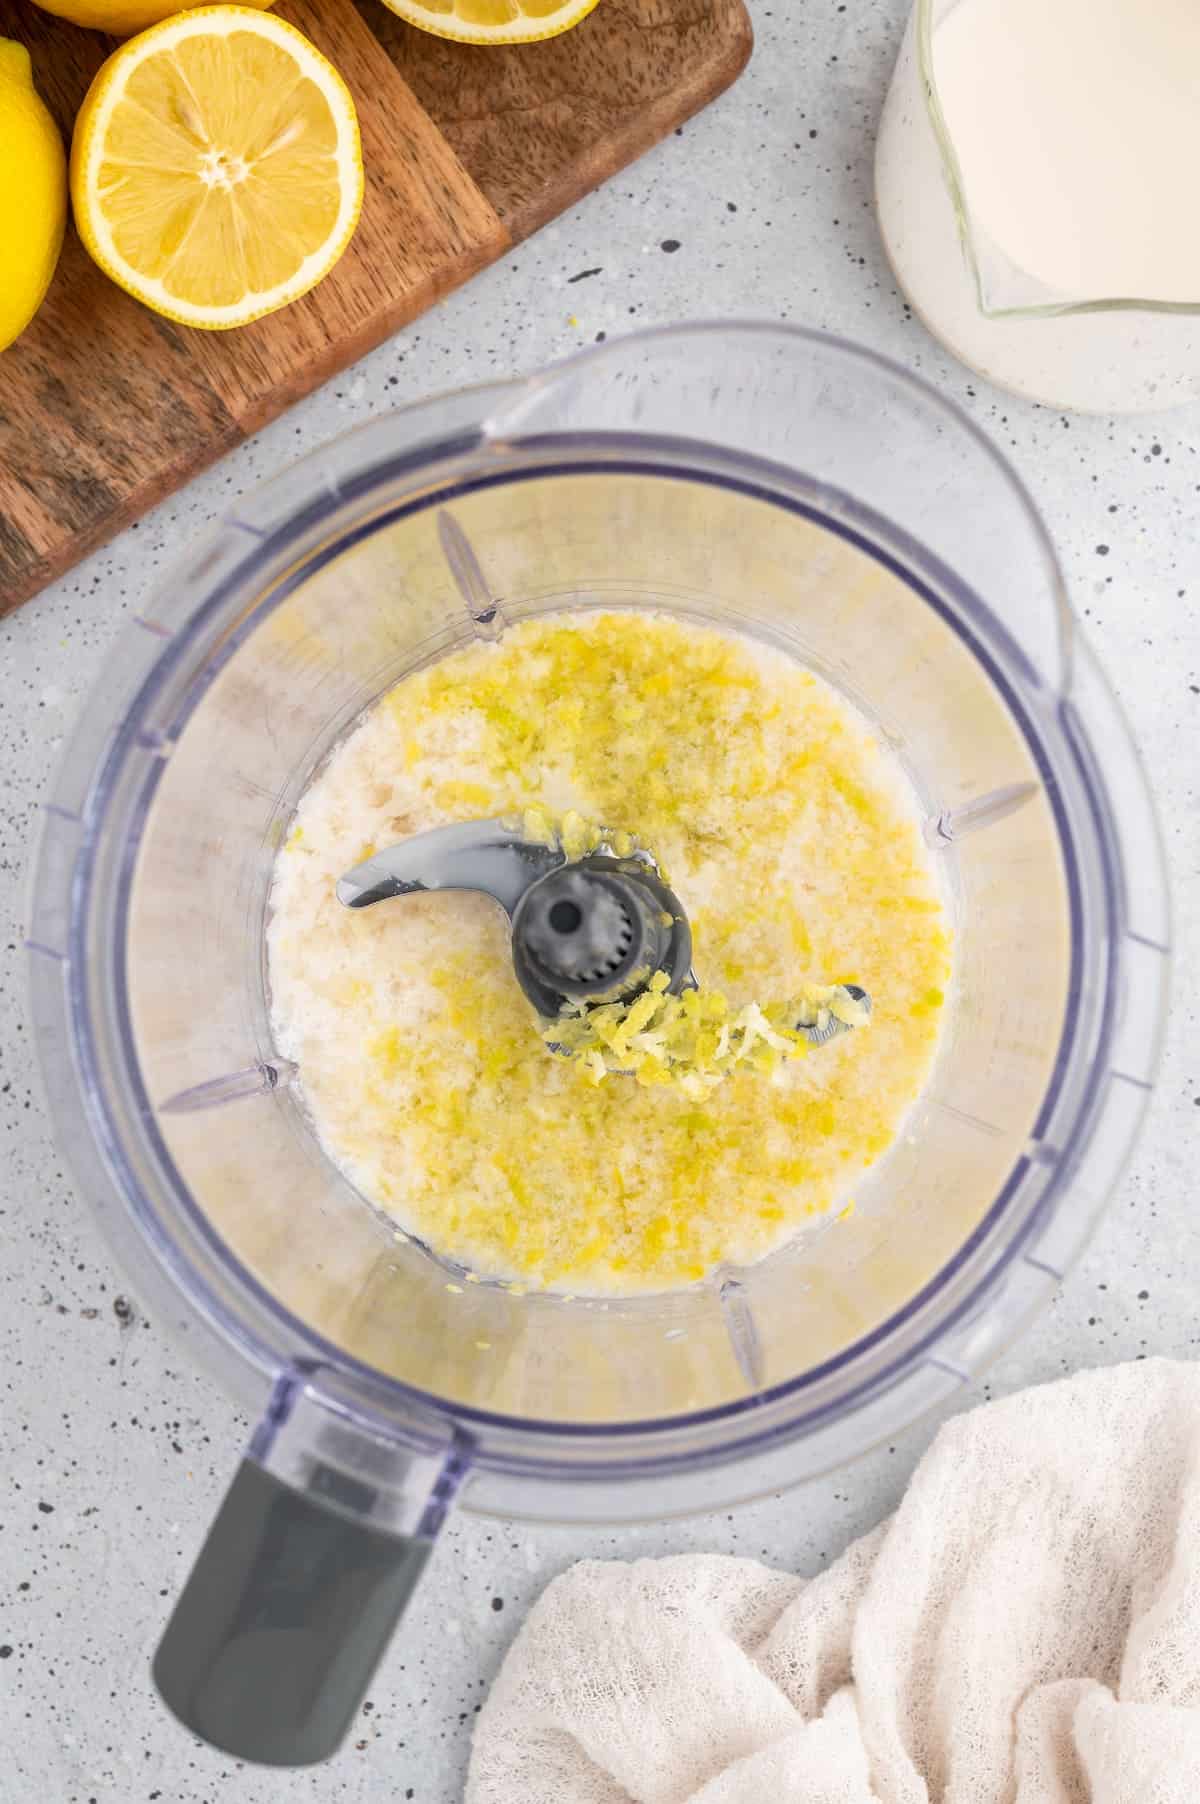 Liquid ingredients for this lemon smoothie in a blender.